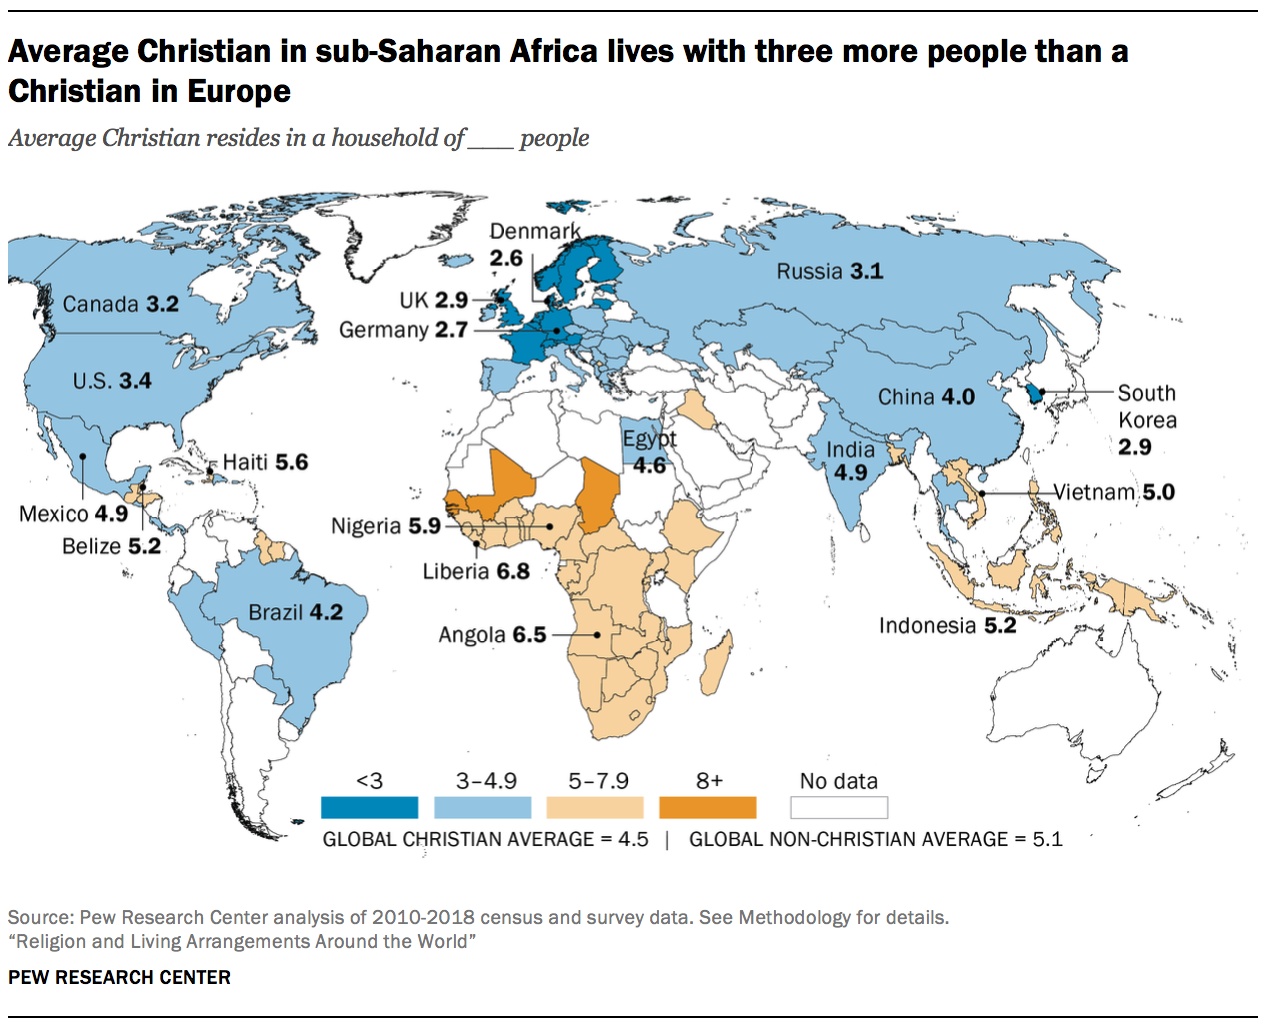 Average Christian in sub-Saharan Africa lives with three more people than a Christian in Europe